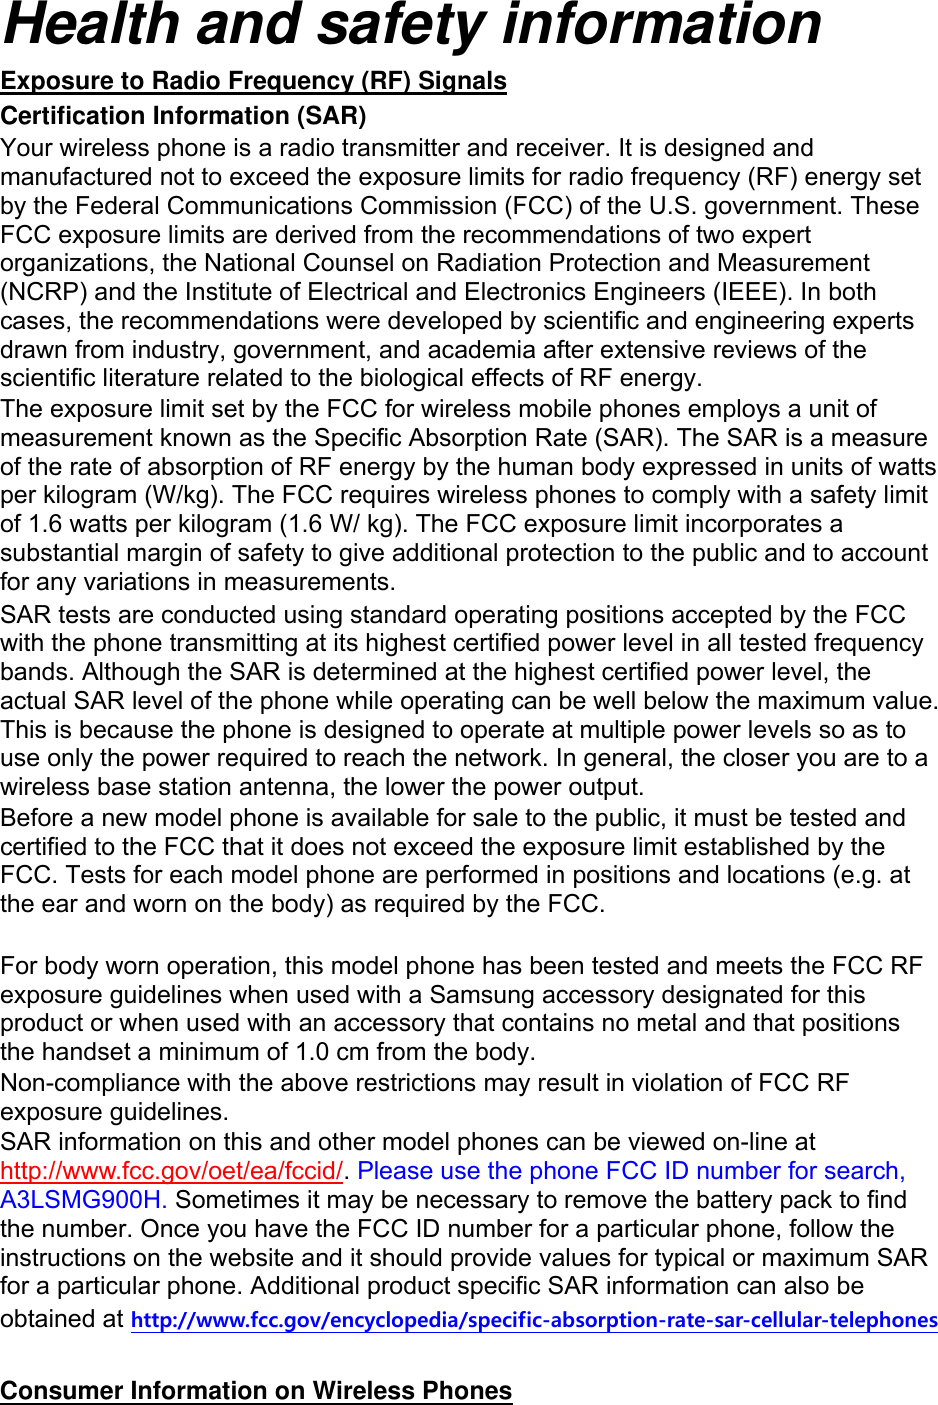 Health and safety information Exposure to Radio Frequency (RF) Signals Certification Information (SAR) Your wireless phone is a radio transmitter and receiver. It is designed and manufactured not to exceed the exposure limits for radio frequency (RF) energy set by the Federal Communications Commission (FCC) of the U.S. government. These FCC exposure limits are derived from the recommendations of two expert organizations, the National Counsel on Radiation Protection and Measurement (NCRP) and the Institute of Electrical and Electronics Engineers (IEEE). In both cases, the recommendations were developed by scientific and engineering experts drawn from industry, government, and academia after extensive reviews of the scientific literature related to the biological effects of RF energy. The exposure limit set by the FCC for wireless mobile phones employs a unit of measurement known as the Specific Absorption Rate (SAR). The SAR is a measure of the rate of absorption of RF energy by the human body expressed in units of watts per kilogram (W/kg). The FCC requires wireless phones to comply with a safety limit of 1.6 watts per kilogram (1.6 W/ kg). The FCC exposure limit incorporates a substantial margin of safety to give additional protection to the public and to account for any variations in measurements. SAR tests are conducted using standard operating positions accepted by the FCC with the phone transmitting at its highest certified power level in all tested frequency bands. Although the SAR is determined at the highest certified power level, the actual SAR level of the phone while operating can be well below the maximum value. This is because the phone is designed to operate at multiple power levels so as to use only the power required to reach the network. In general, the closer you are to a wireless base station antenna, the lower the power output. Before a new model phone is available for sale to the public, it must be tested and certified to the FCC that it does not exceed the exposure limit established by the FCC. Tests for each model phone are performed in positions and locations (e.g. at the ear and worn on the body) as required by the FCC.      For body worn operation, this model phone has been tested and meets the FCC RF exposure guidelines when used with a Samsung accessory designated for this product or when used with an accessory that contains no metal and that positions the handset a minimum of 1.0 cm from the body.   Non-compliance with the above restrictions may result in violation of FCC RF exposure guidelines. SAR information on this and other model phones can be viewed on-line at http://www.fcc.gov/oet/ea/fccid/. Please use the phone FCC ID number for search, A3LSMG900H. Sometimes it may be necessary to remove the battery pack to find the number. Once you have the FCC ID number for a particular phone, follow the instructions on the website and it should provide values for typical or maximum SAR for a particular phone. Additional product specific SAR information can also be obtained at http://www.fcc.gov/encyclopedia/specific-absorption-rate-sar-cellular-telephones  Consumer Information on Wireless Phones 